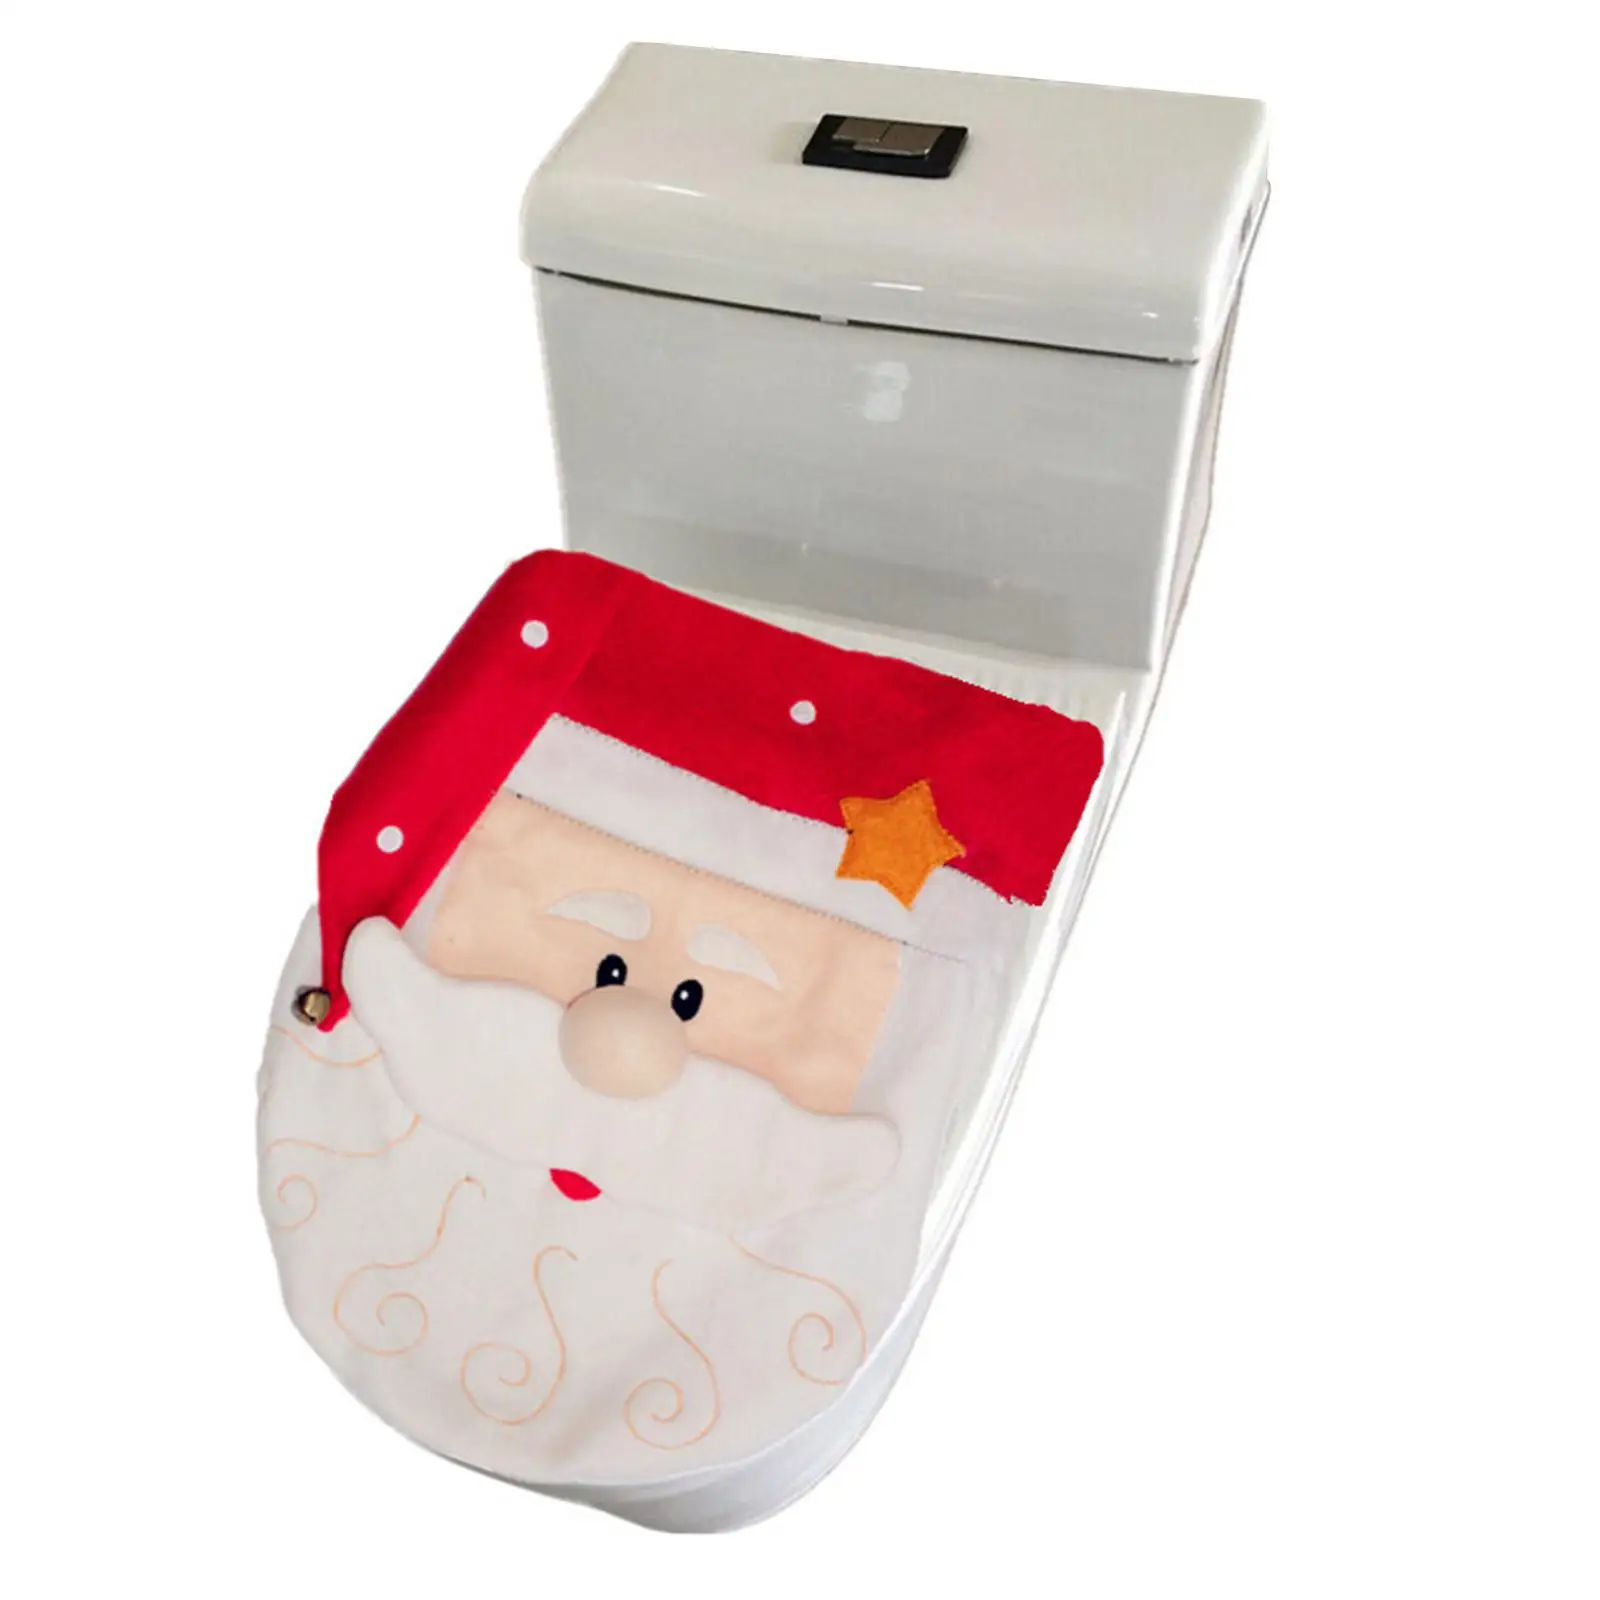 Cute Toilet Seat Cover Christmas Mat Ornament Red Supplies Lid Cover for Bathroom Party Decoration House Festival